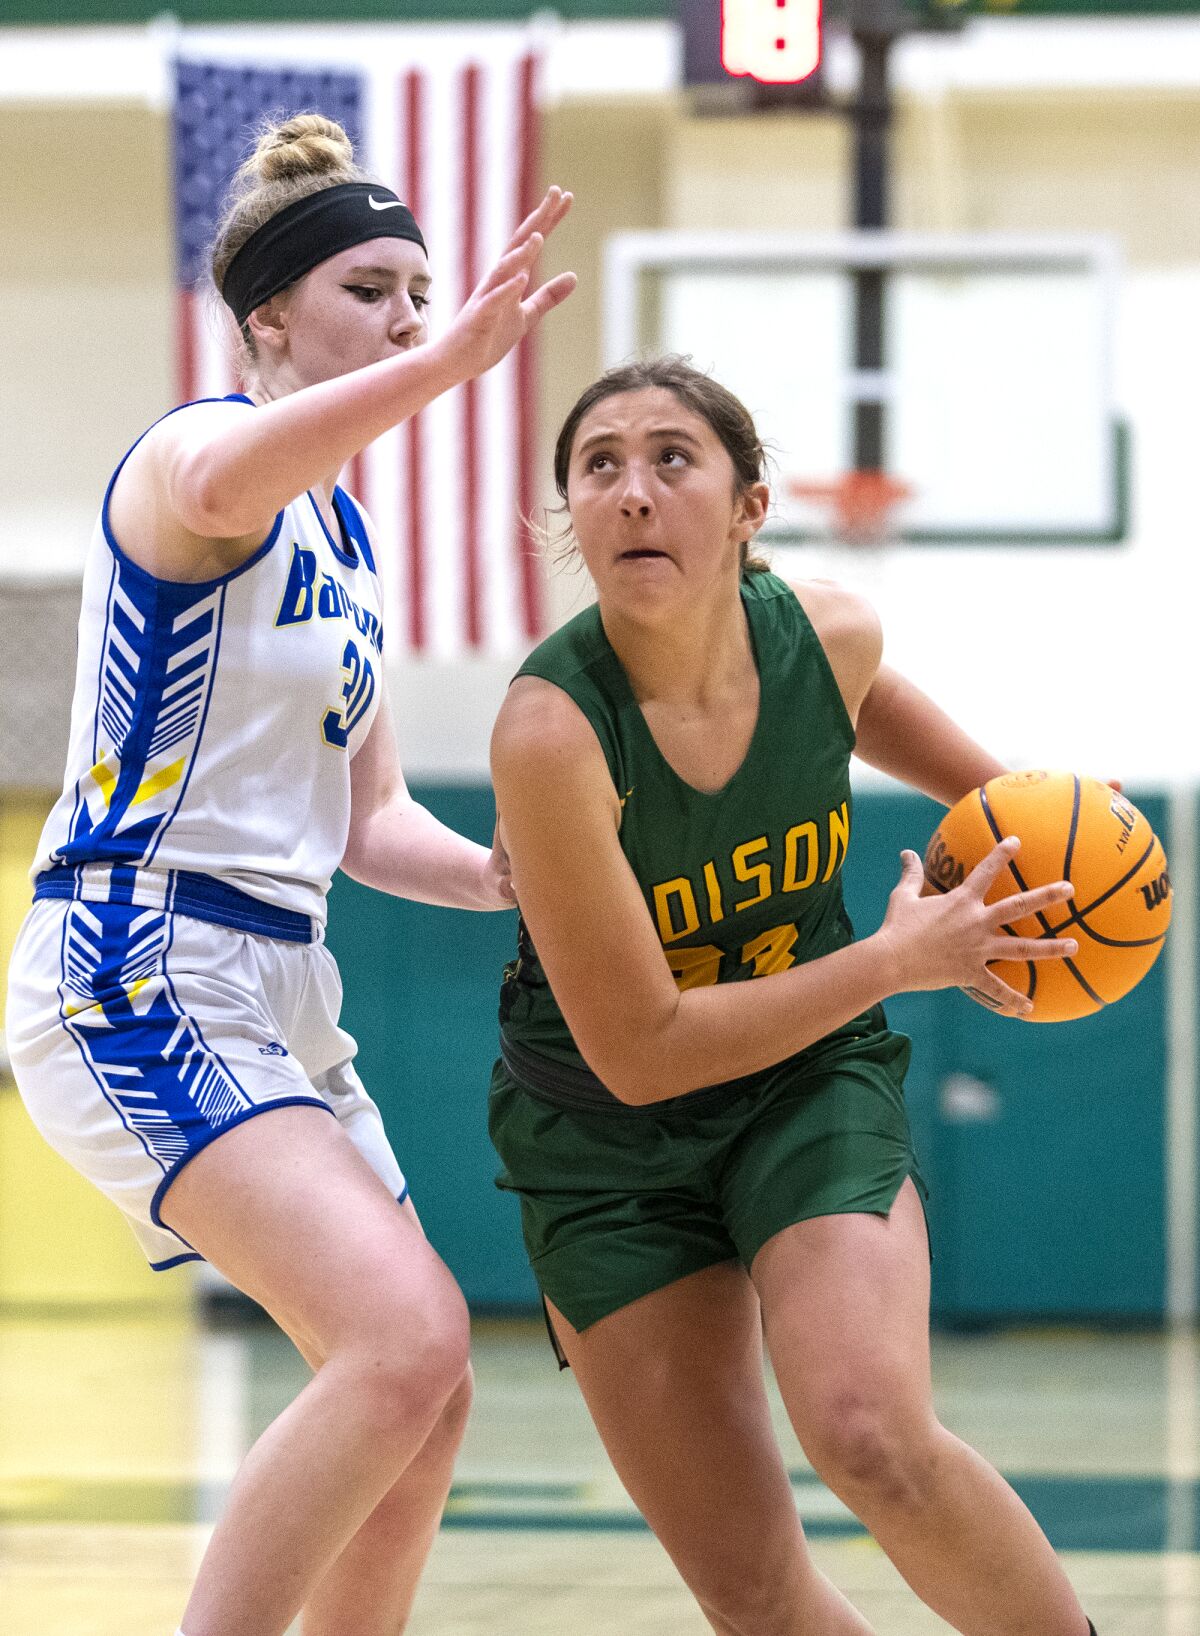 Edison's Mia Cassel scored 22 points for the Chargers in Tuesday's Wave League opener against Huntington Beach.